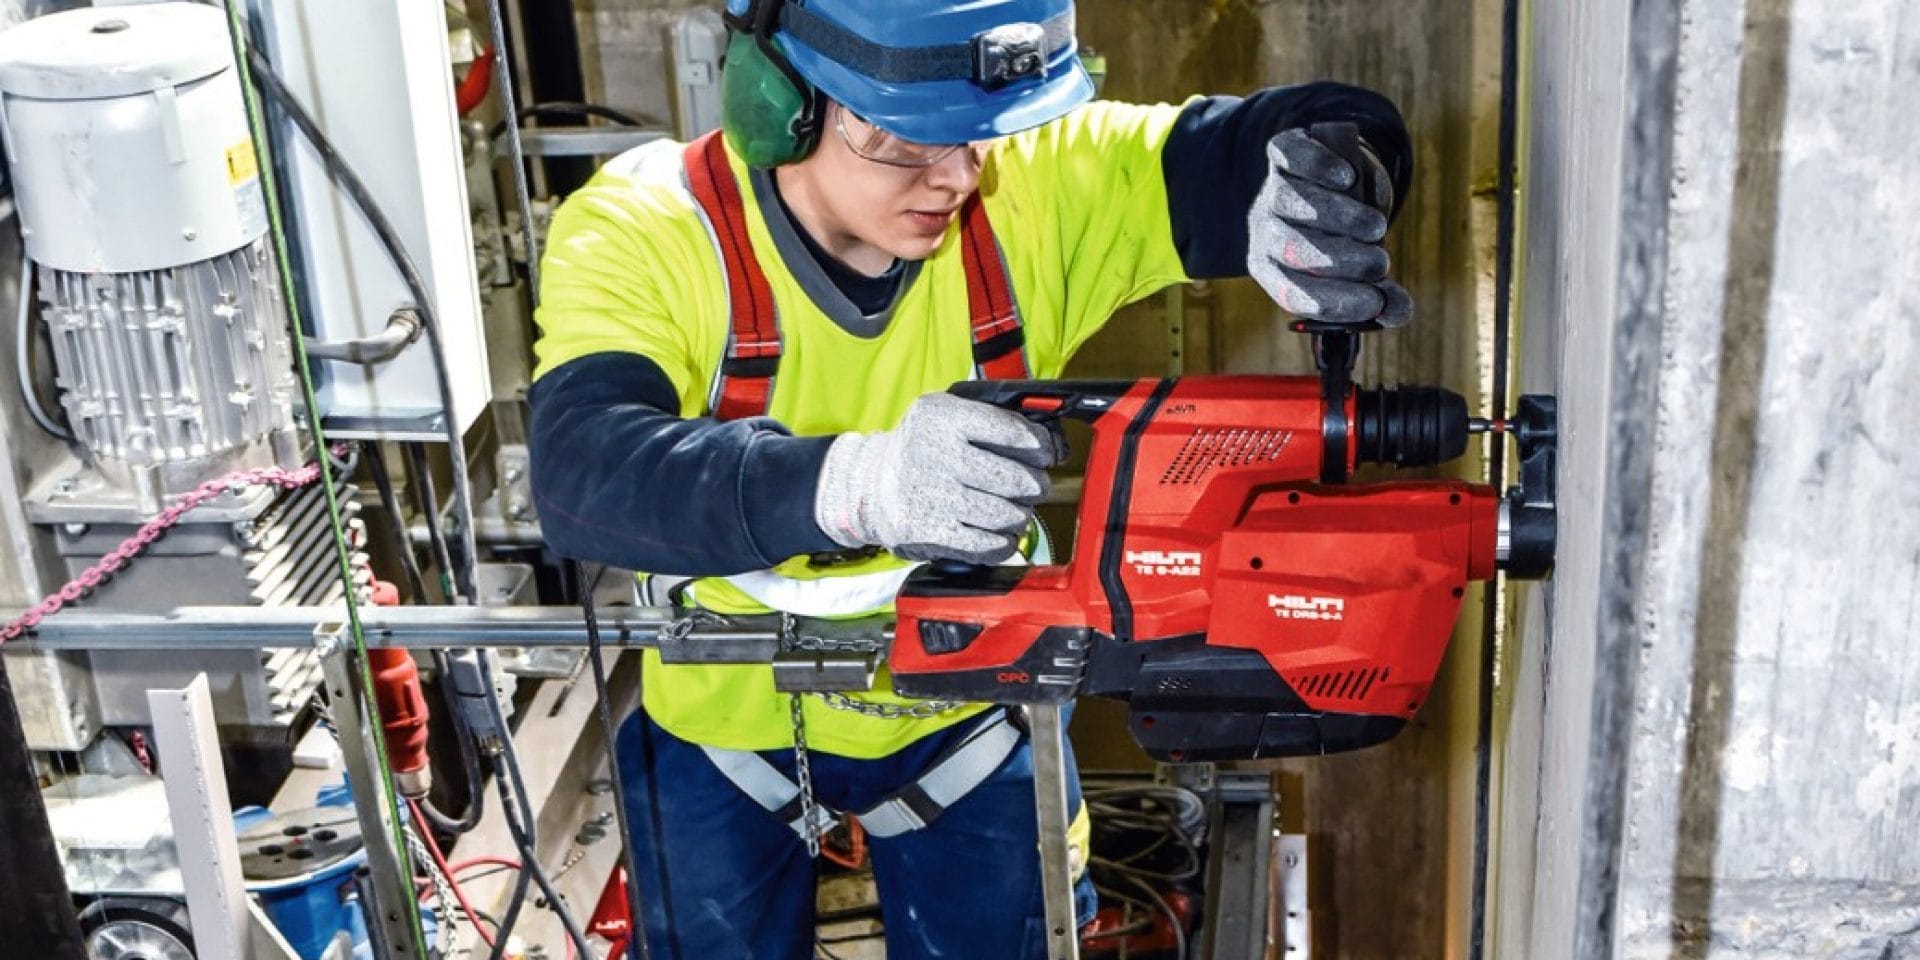 Cutting edge tools operate to the highest safety standards.